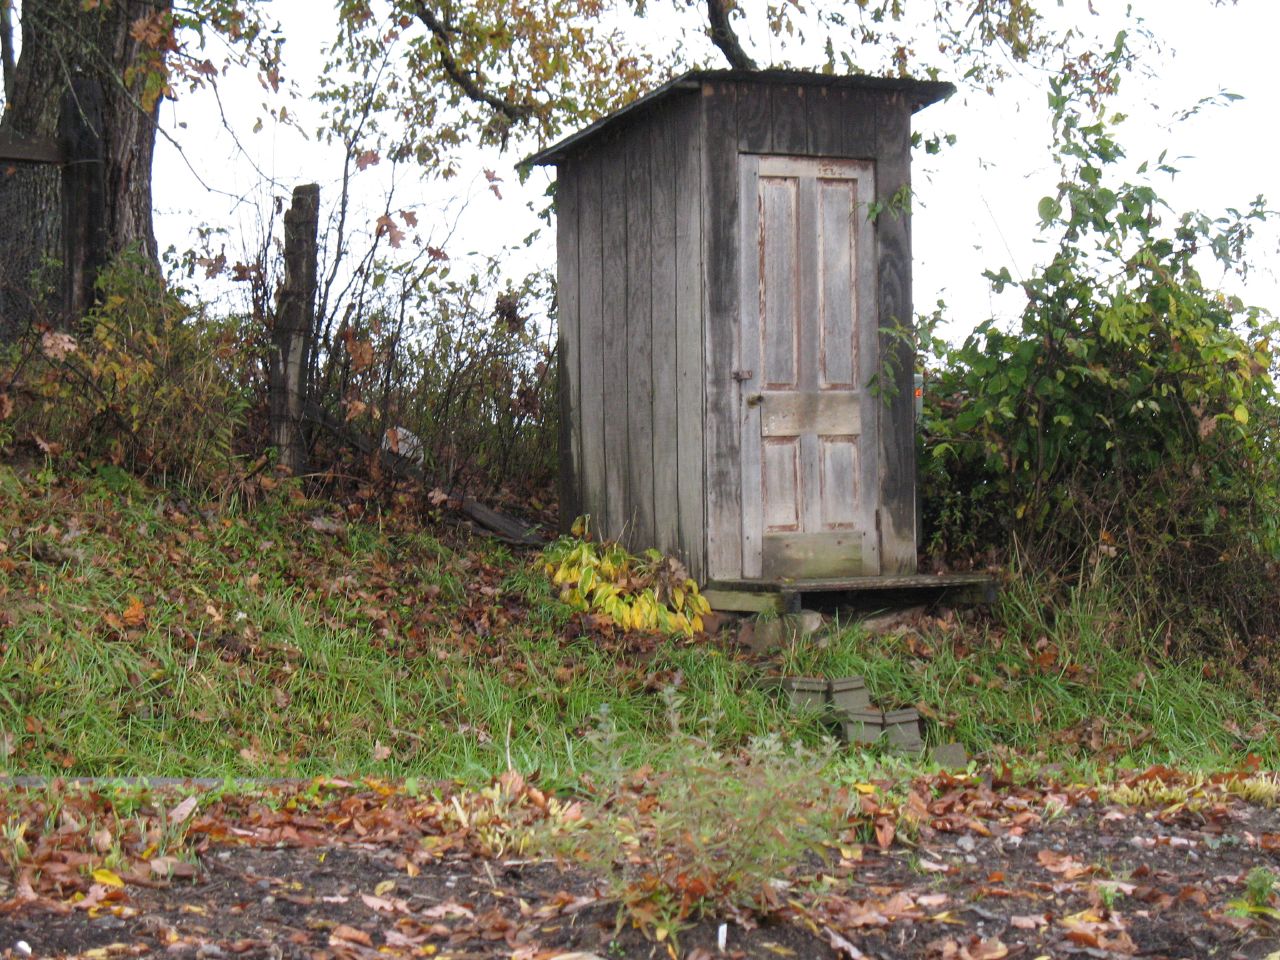 How to build ‘bathroom facilities’ that will keep you safe and healthy